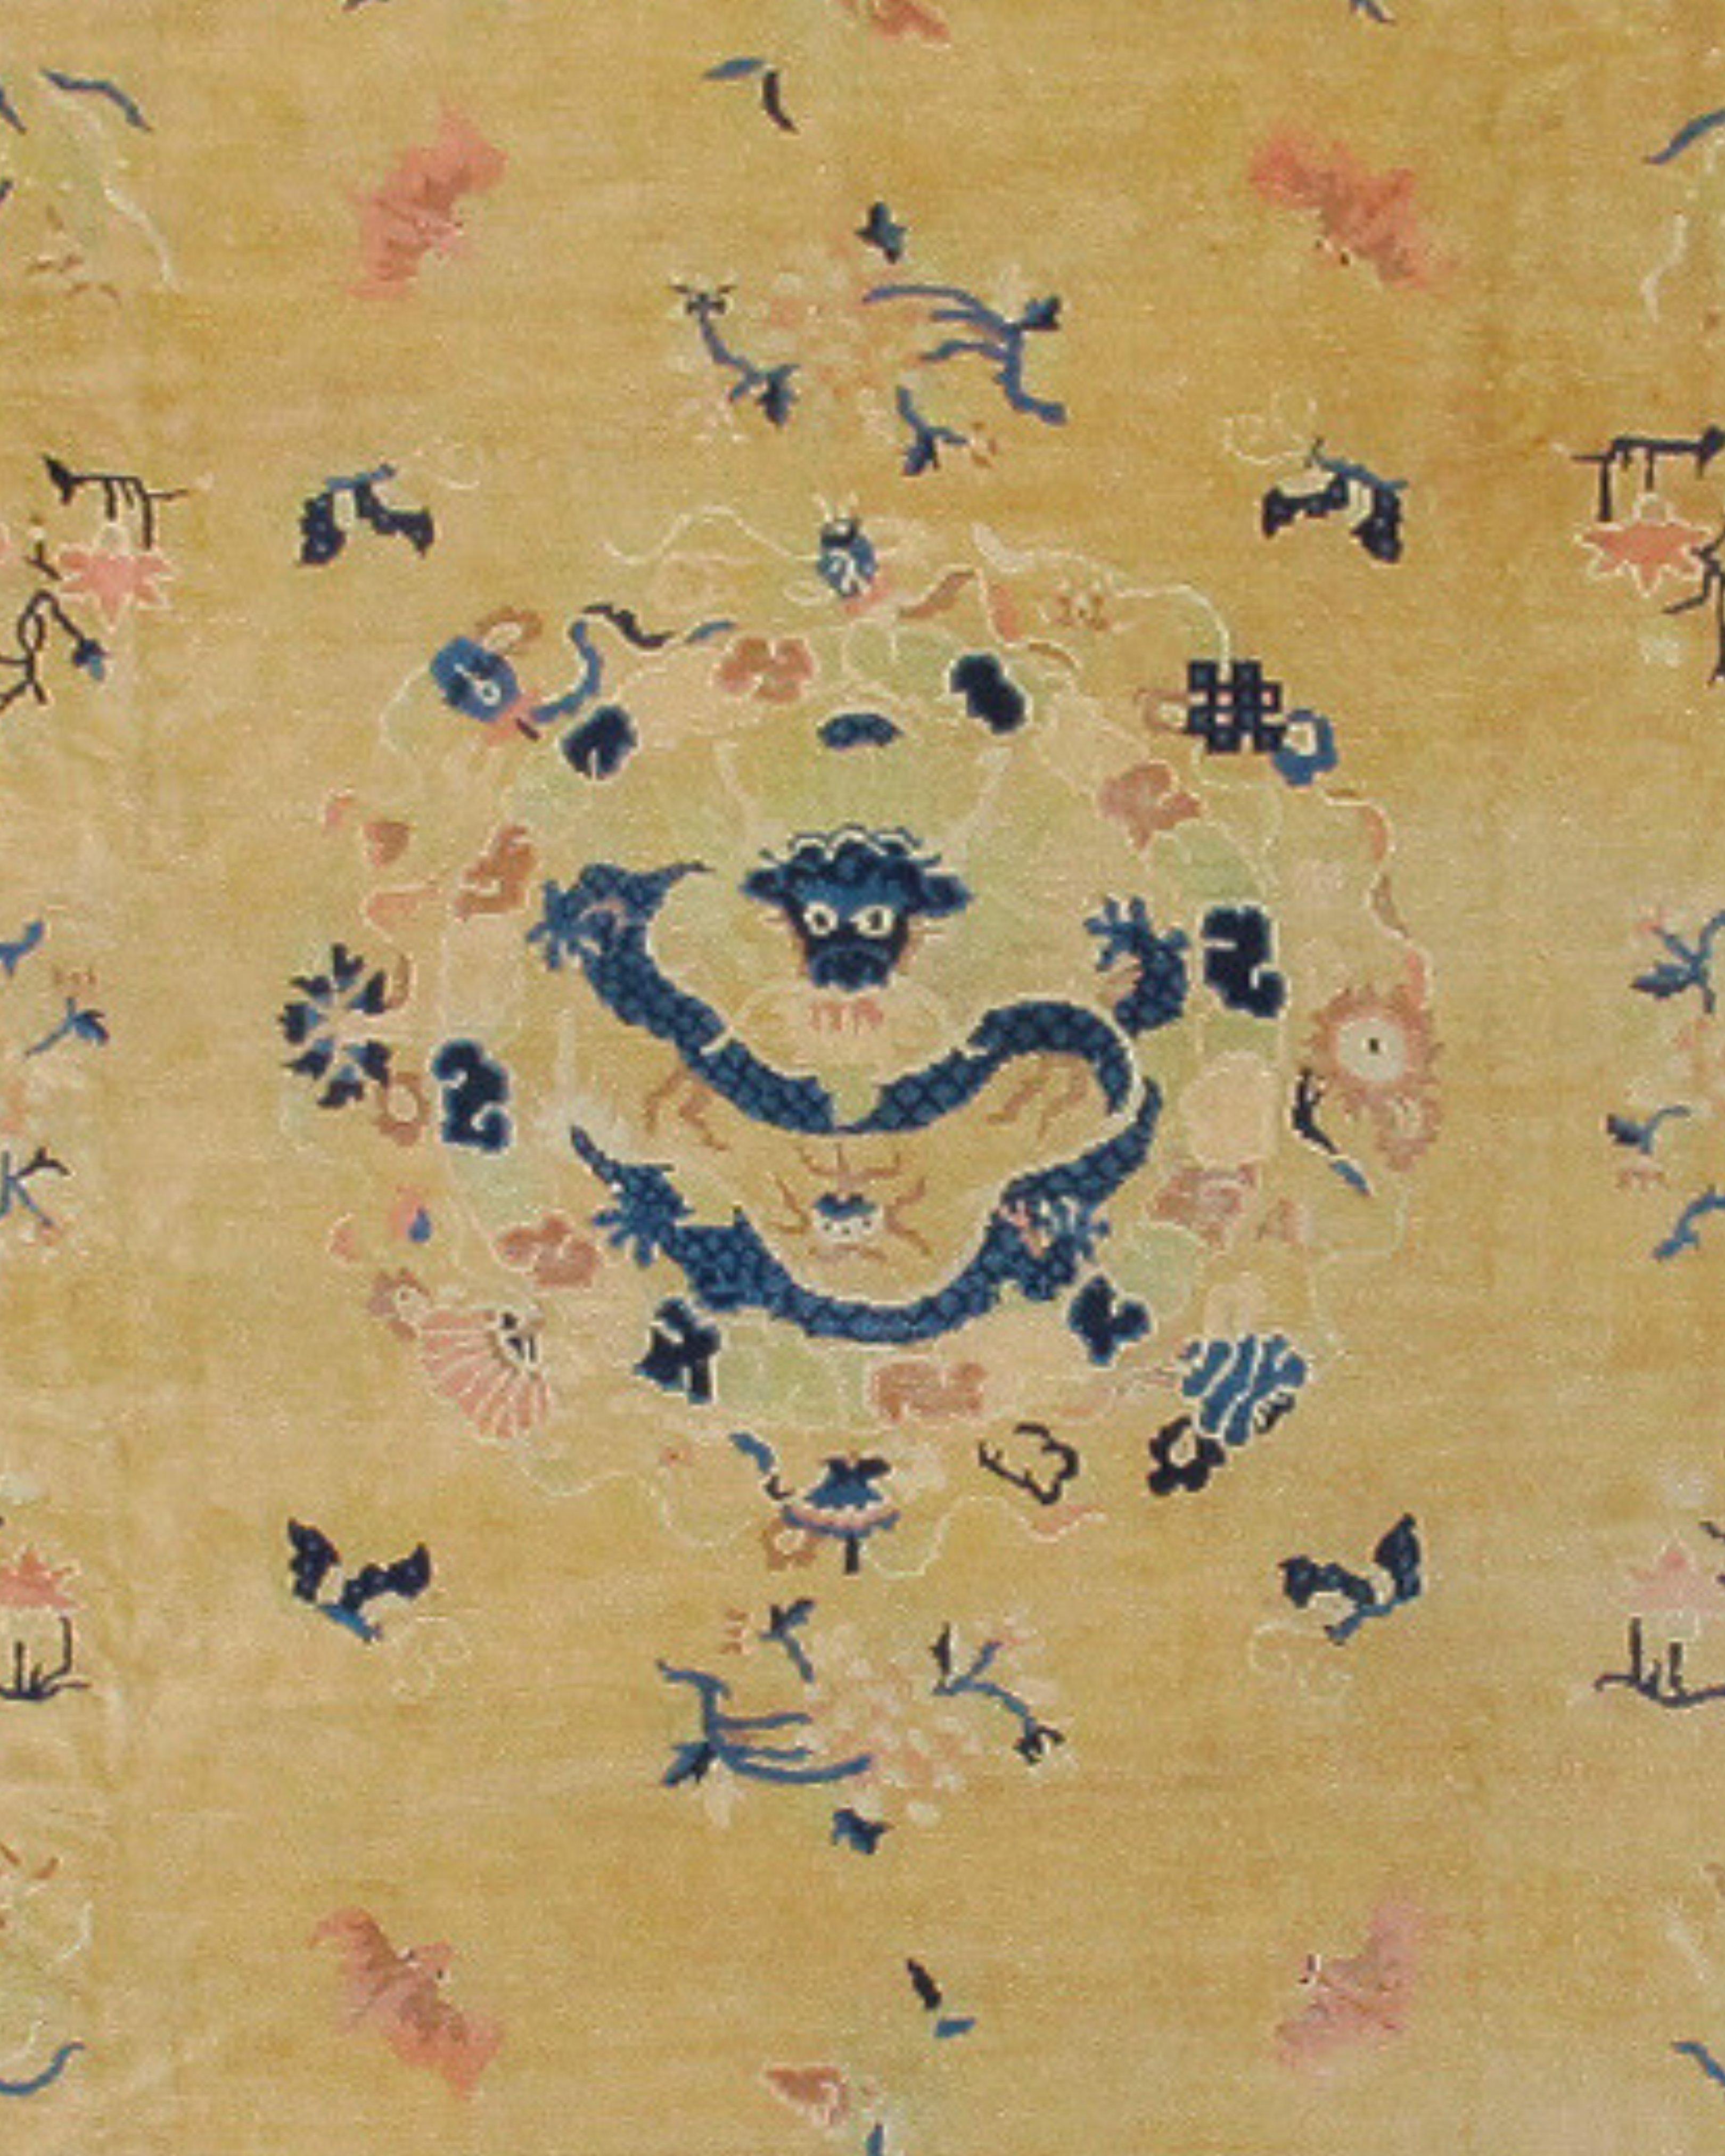 Antique Chinese Peking Carpet Rug, c. 1920

Additional Information:
Dimensions: 9'0